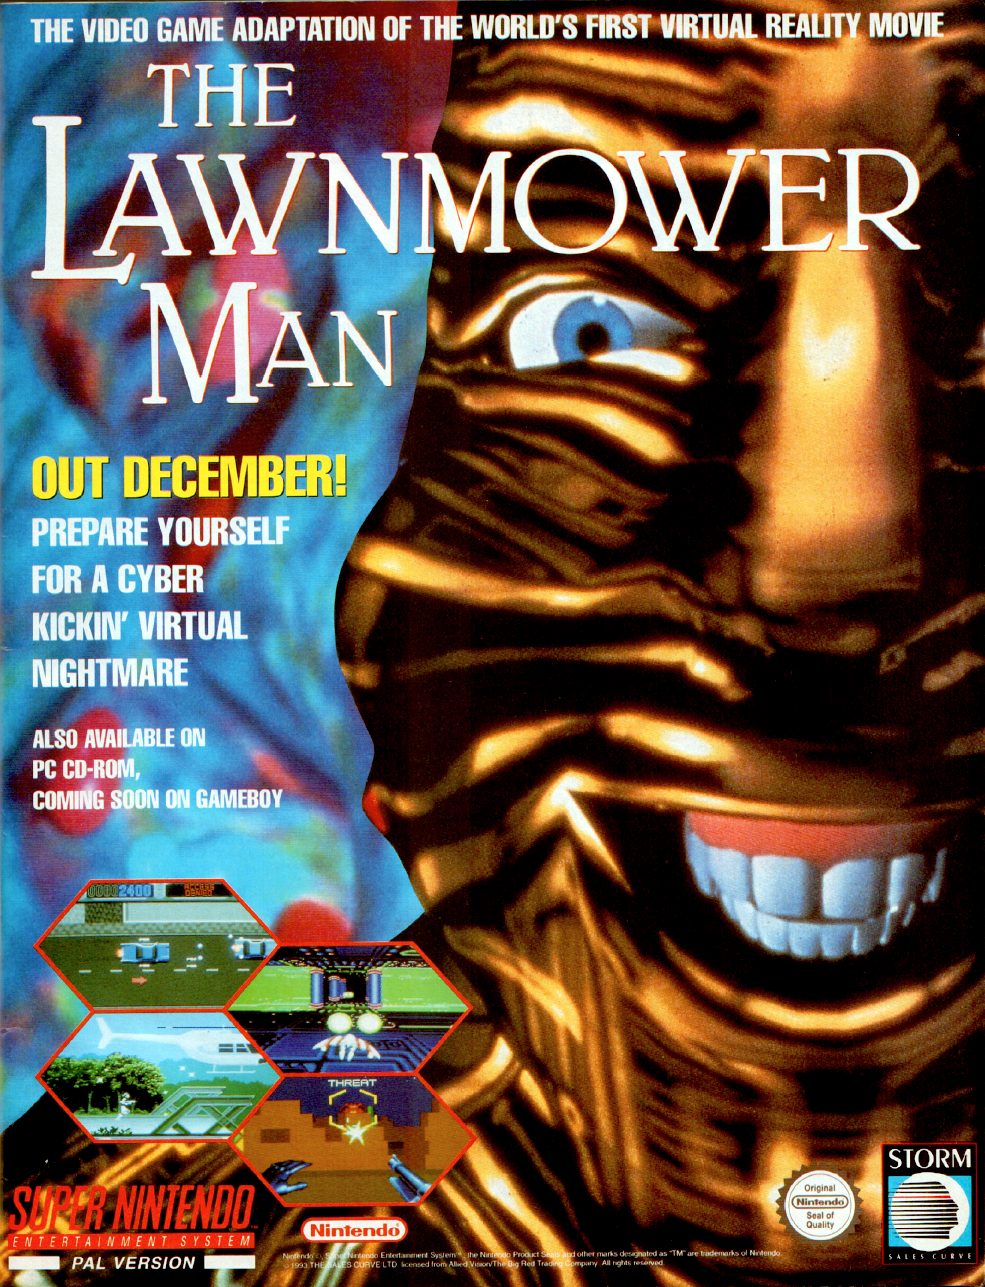 Image For Post | Description
The Lawnmower Man is the game based on the 1992 movie of the same name (itself loosely based on a Stephen King short story) starring pre-Bond fame Pierce Brosnan as Dr. Lawrence Angelo, a scientist working for Virtual Space Industries in "Project 5", a secret research that attempts to increase the intelligence of primates using psychotropic drugs and VR training.

While the CD version of the game (PC, Sega CD) is an interactive movie, all three cartridge versions are platformers. The player takes control of either Dr. Angelo or Carla Parkette (the mother of Jobe's best friend) in typical side-scrolling shooting action, similar to Contra and Metal Slug. The player collects weapon upgrades or data discs. Once the player has collected a number of data discs, the discs morph into a Virtual Suit that gives the player protection from one hit.

The player visits several locations seen in the movie, such as Harley's Gas 'Er Up and the VSI headquarters. The game includes true 3D level connectors that are based on the CG sequences of the movie. These involve avoiding obstacles and the occasional high-speed shooting in the VR world. There are four different levels (Virtual World, Cyber War, Cyber Run and Cyber Tube), and each takes a slightly different approach. 

Virtual World is set in first person and the objective is to dodge obstacles such as trees and arches to get to the exit. Cyber War is similar to Virtual World, but with some shooting stops. Cyber Run is set in the third person and requires occasional shooting of obstacles, while Cyber Tube involves fast travel and plenty of enemies in a VR tunnel. 

The twists of the game are true-3D level connectors, based on the CG sequences of the movie, usually all involving avoiding obstacles (and the occasional shooting) at high speed in the VR world. There are four different (Virtual World, Cyber War, Cyber Run and Cyber Tube), each taking a slightly different approach (Virtual World is seen in first person, the objective being dodging obstacles such as trees and archs and reach the exit, Cyber War similar to Virtual World but with some shooting stops, Cyber Run is seen in third person and requires occasional shooting of obstacles, while Cyber Tube is a fast travel with plenty of enemies in a VR tunnel).

Sequel
In late 1995, SCi released a sequel for MS-DOS and Macintosh computers known as CyberWar. Copies of the sequel are quite rare, as it had a limited release by Interplay instead of the publisher of the first game, Time Warner Interactive. CyberWar splits from the story of the second movie, Lawnmower Man 2: Beyond Cyberspace, and has its own story. 

In early 1996, rumors of a third Lawnmower Man video game were spread via chatrooms and video game magazines such as Next Generation and Electronic Gaming Monthly's Quartermann column. The rumors suggested a release for Sega Saturn, Sony PlayStation and Nintendo 64, but no further sequels were produced and no further news has been reported by these publications.